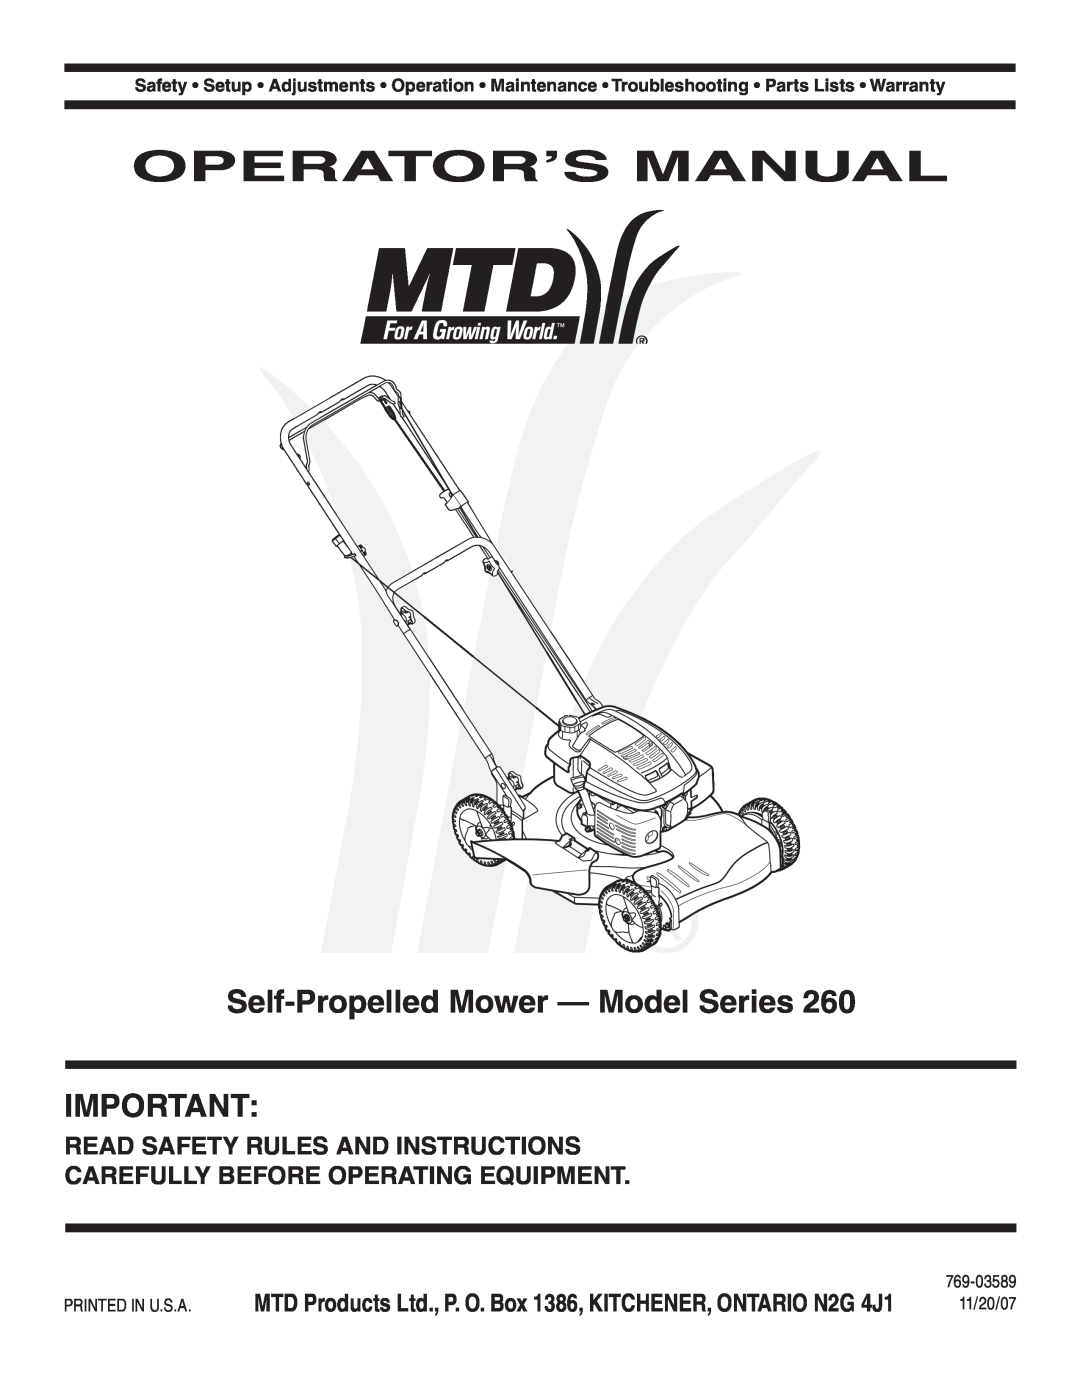 MTD 260 Series warranty Operator’S Manual, Self-Propelled Mower - Model Series, Read Safety Rules And Instructions 